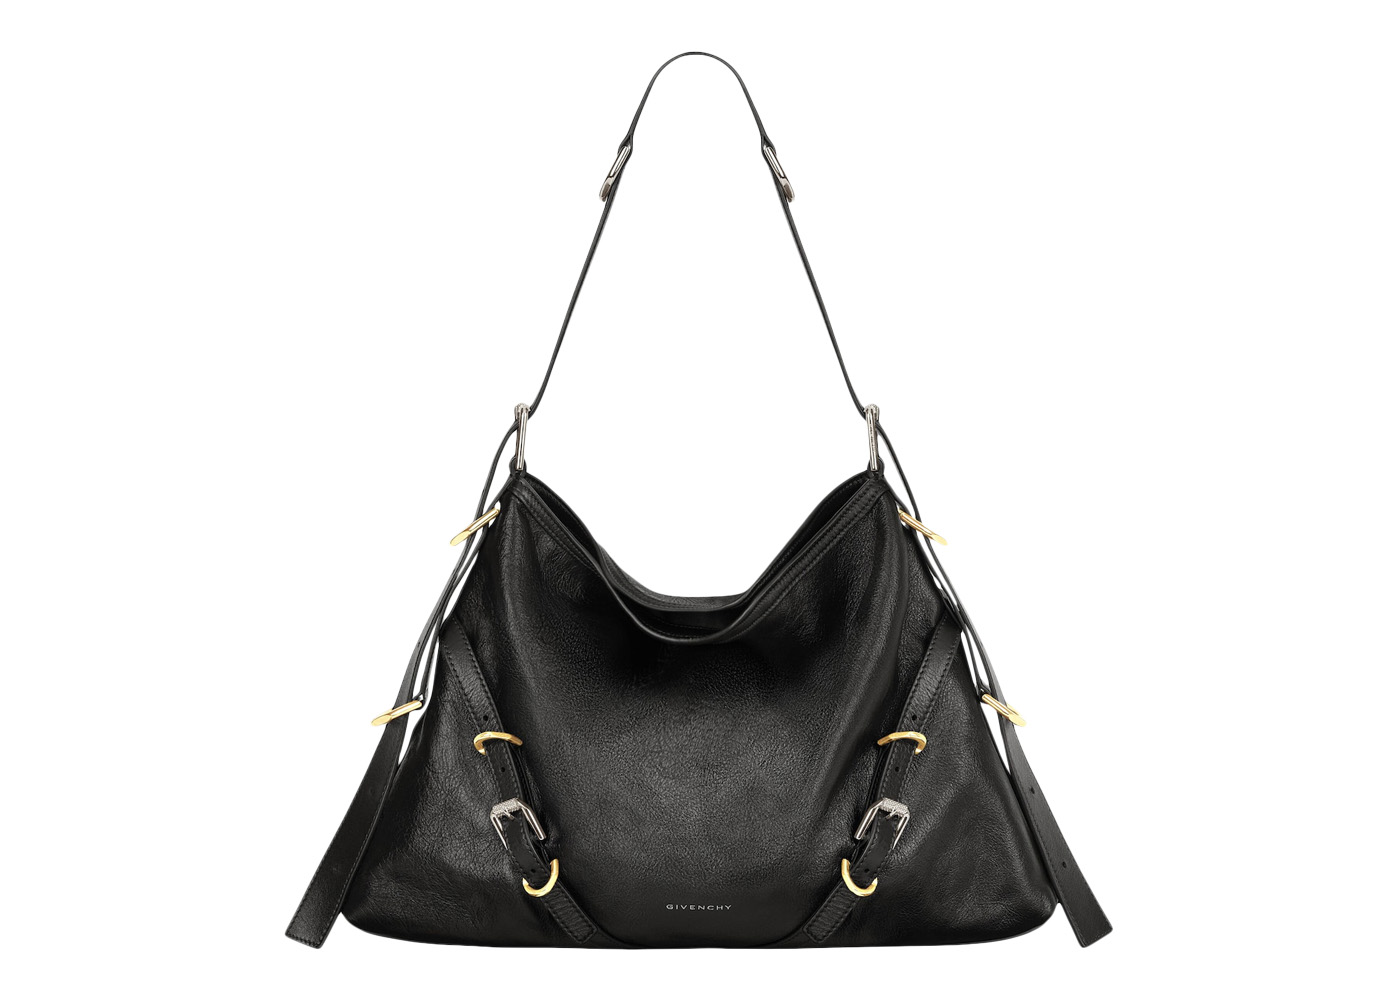 Givenchy Medium Voyou Bag In Leather Black in Calfskin Leather